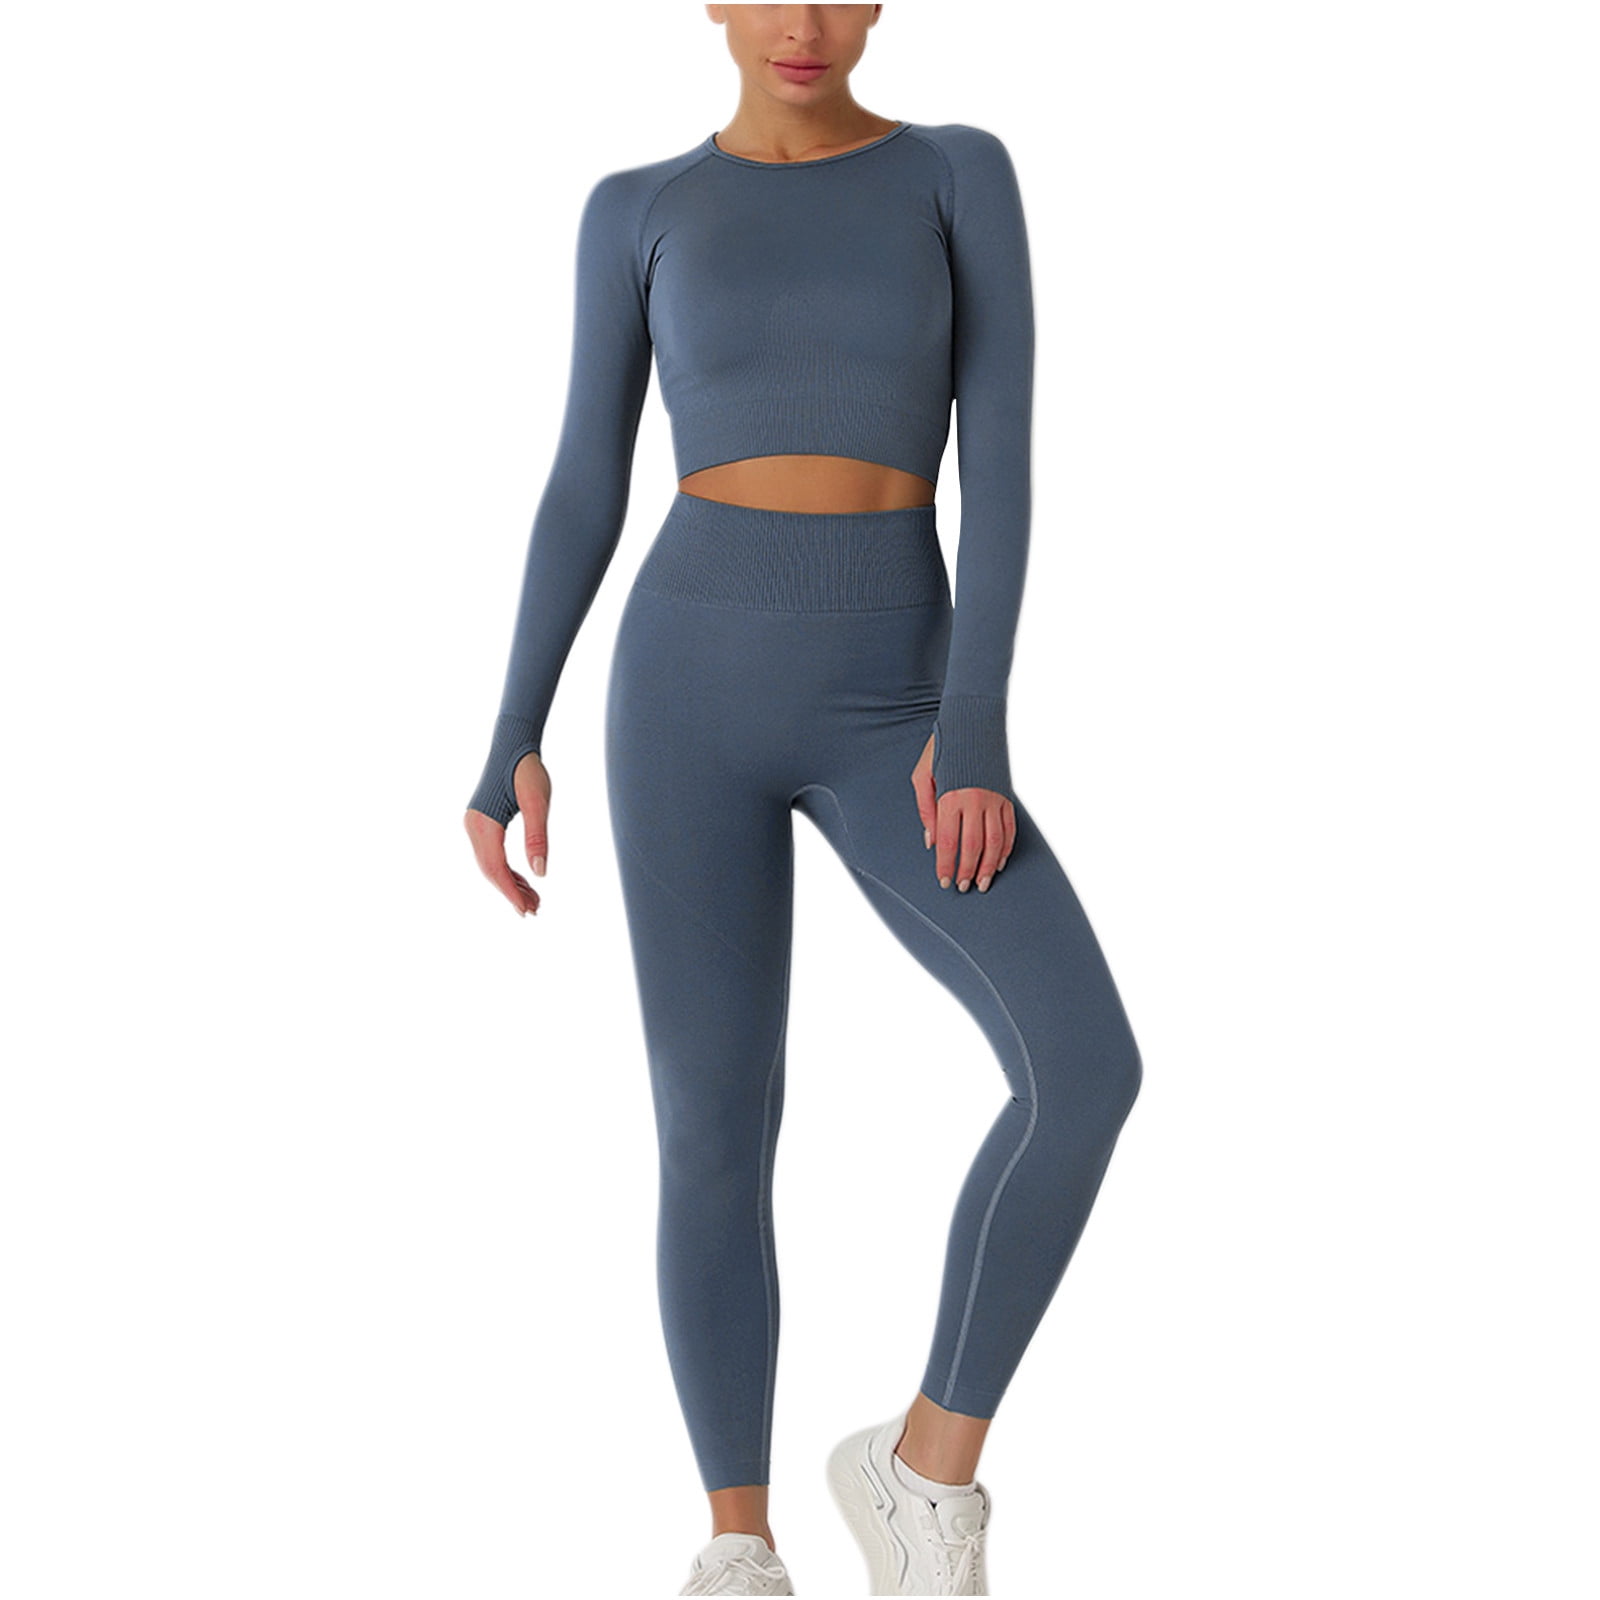 RQYYD On Clearance Workout Sets for Women High Waist Seamless Cute Yoga  Leggings Workout Sets Long Sleeve Crewneck Knit 2 Piece Gym Clothes Dark  Gray